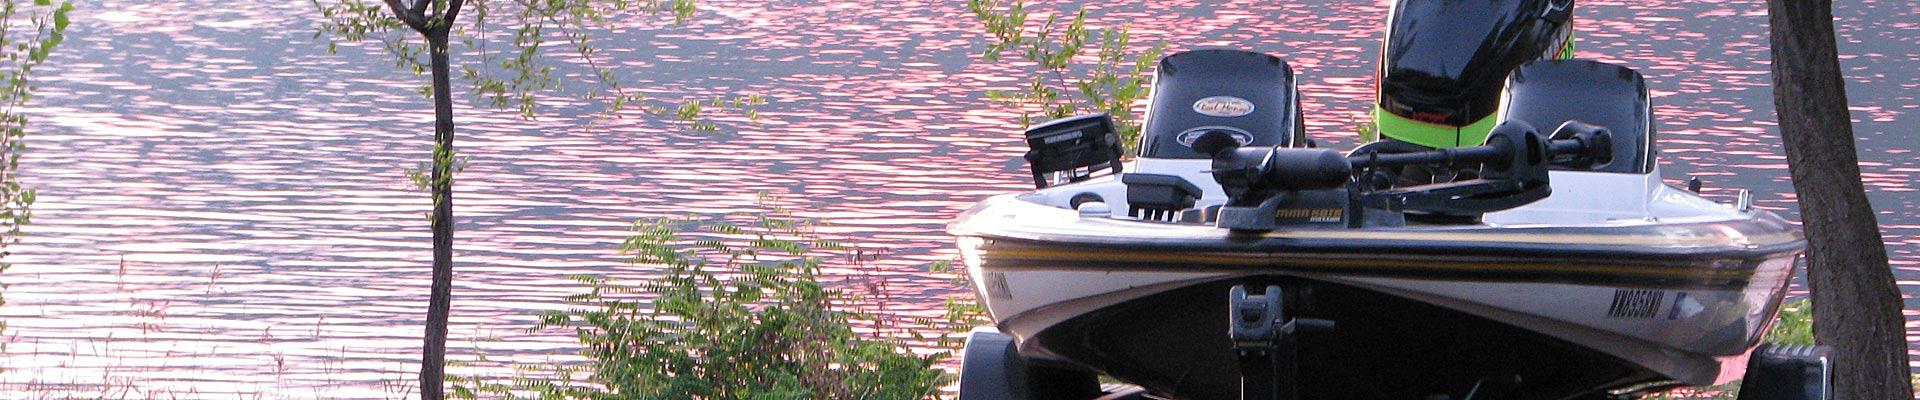 Boating Pre-Trip Checklist  The Ultimate Bass Fishing Resource Guide® LLC